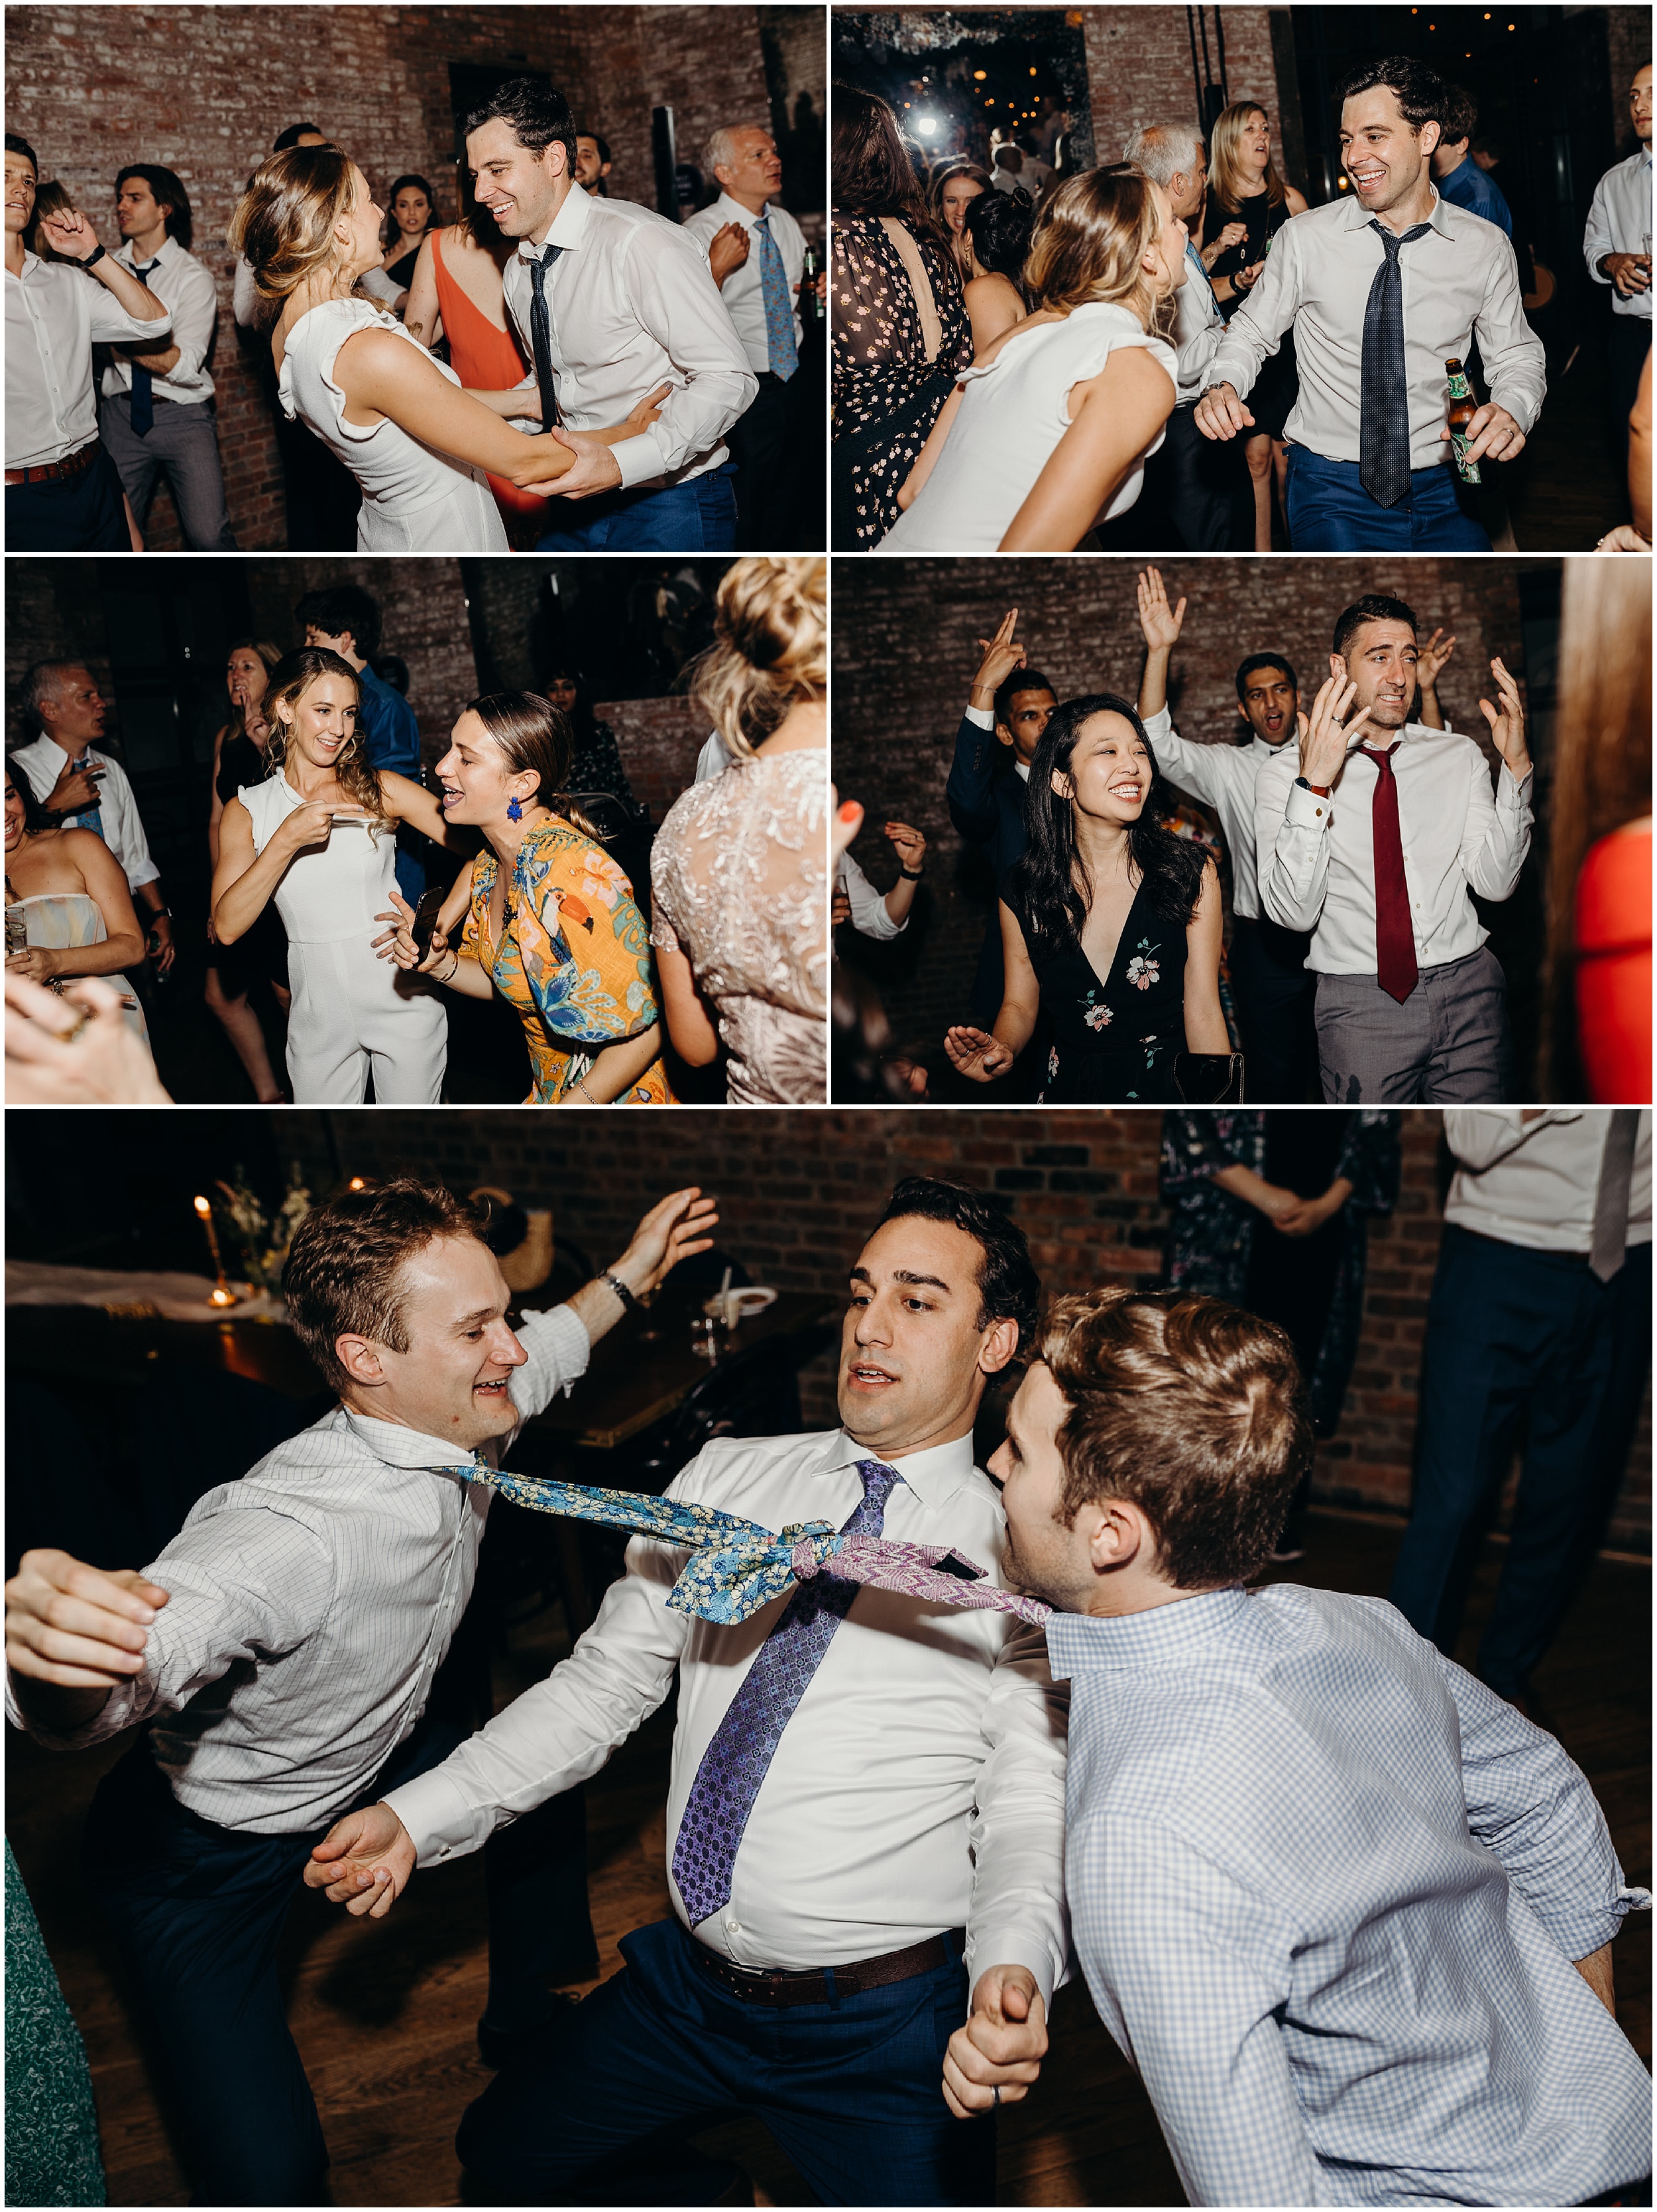 guests dance at a wedding reception at the wythe hotel in brooklyn, new york city